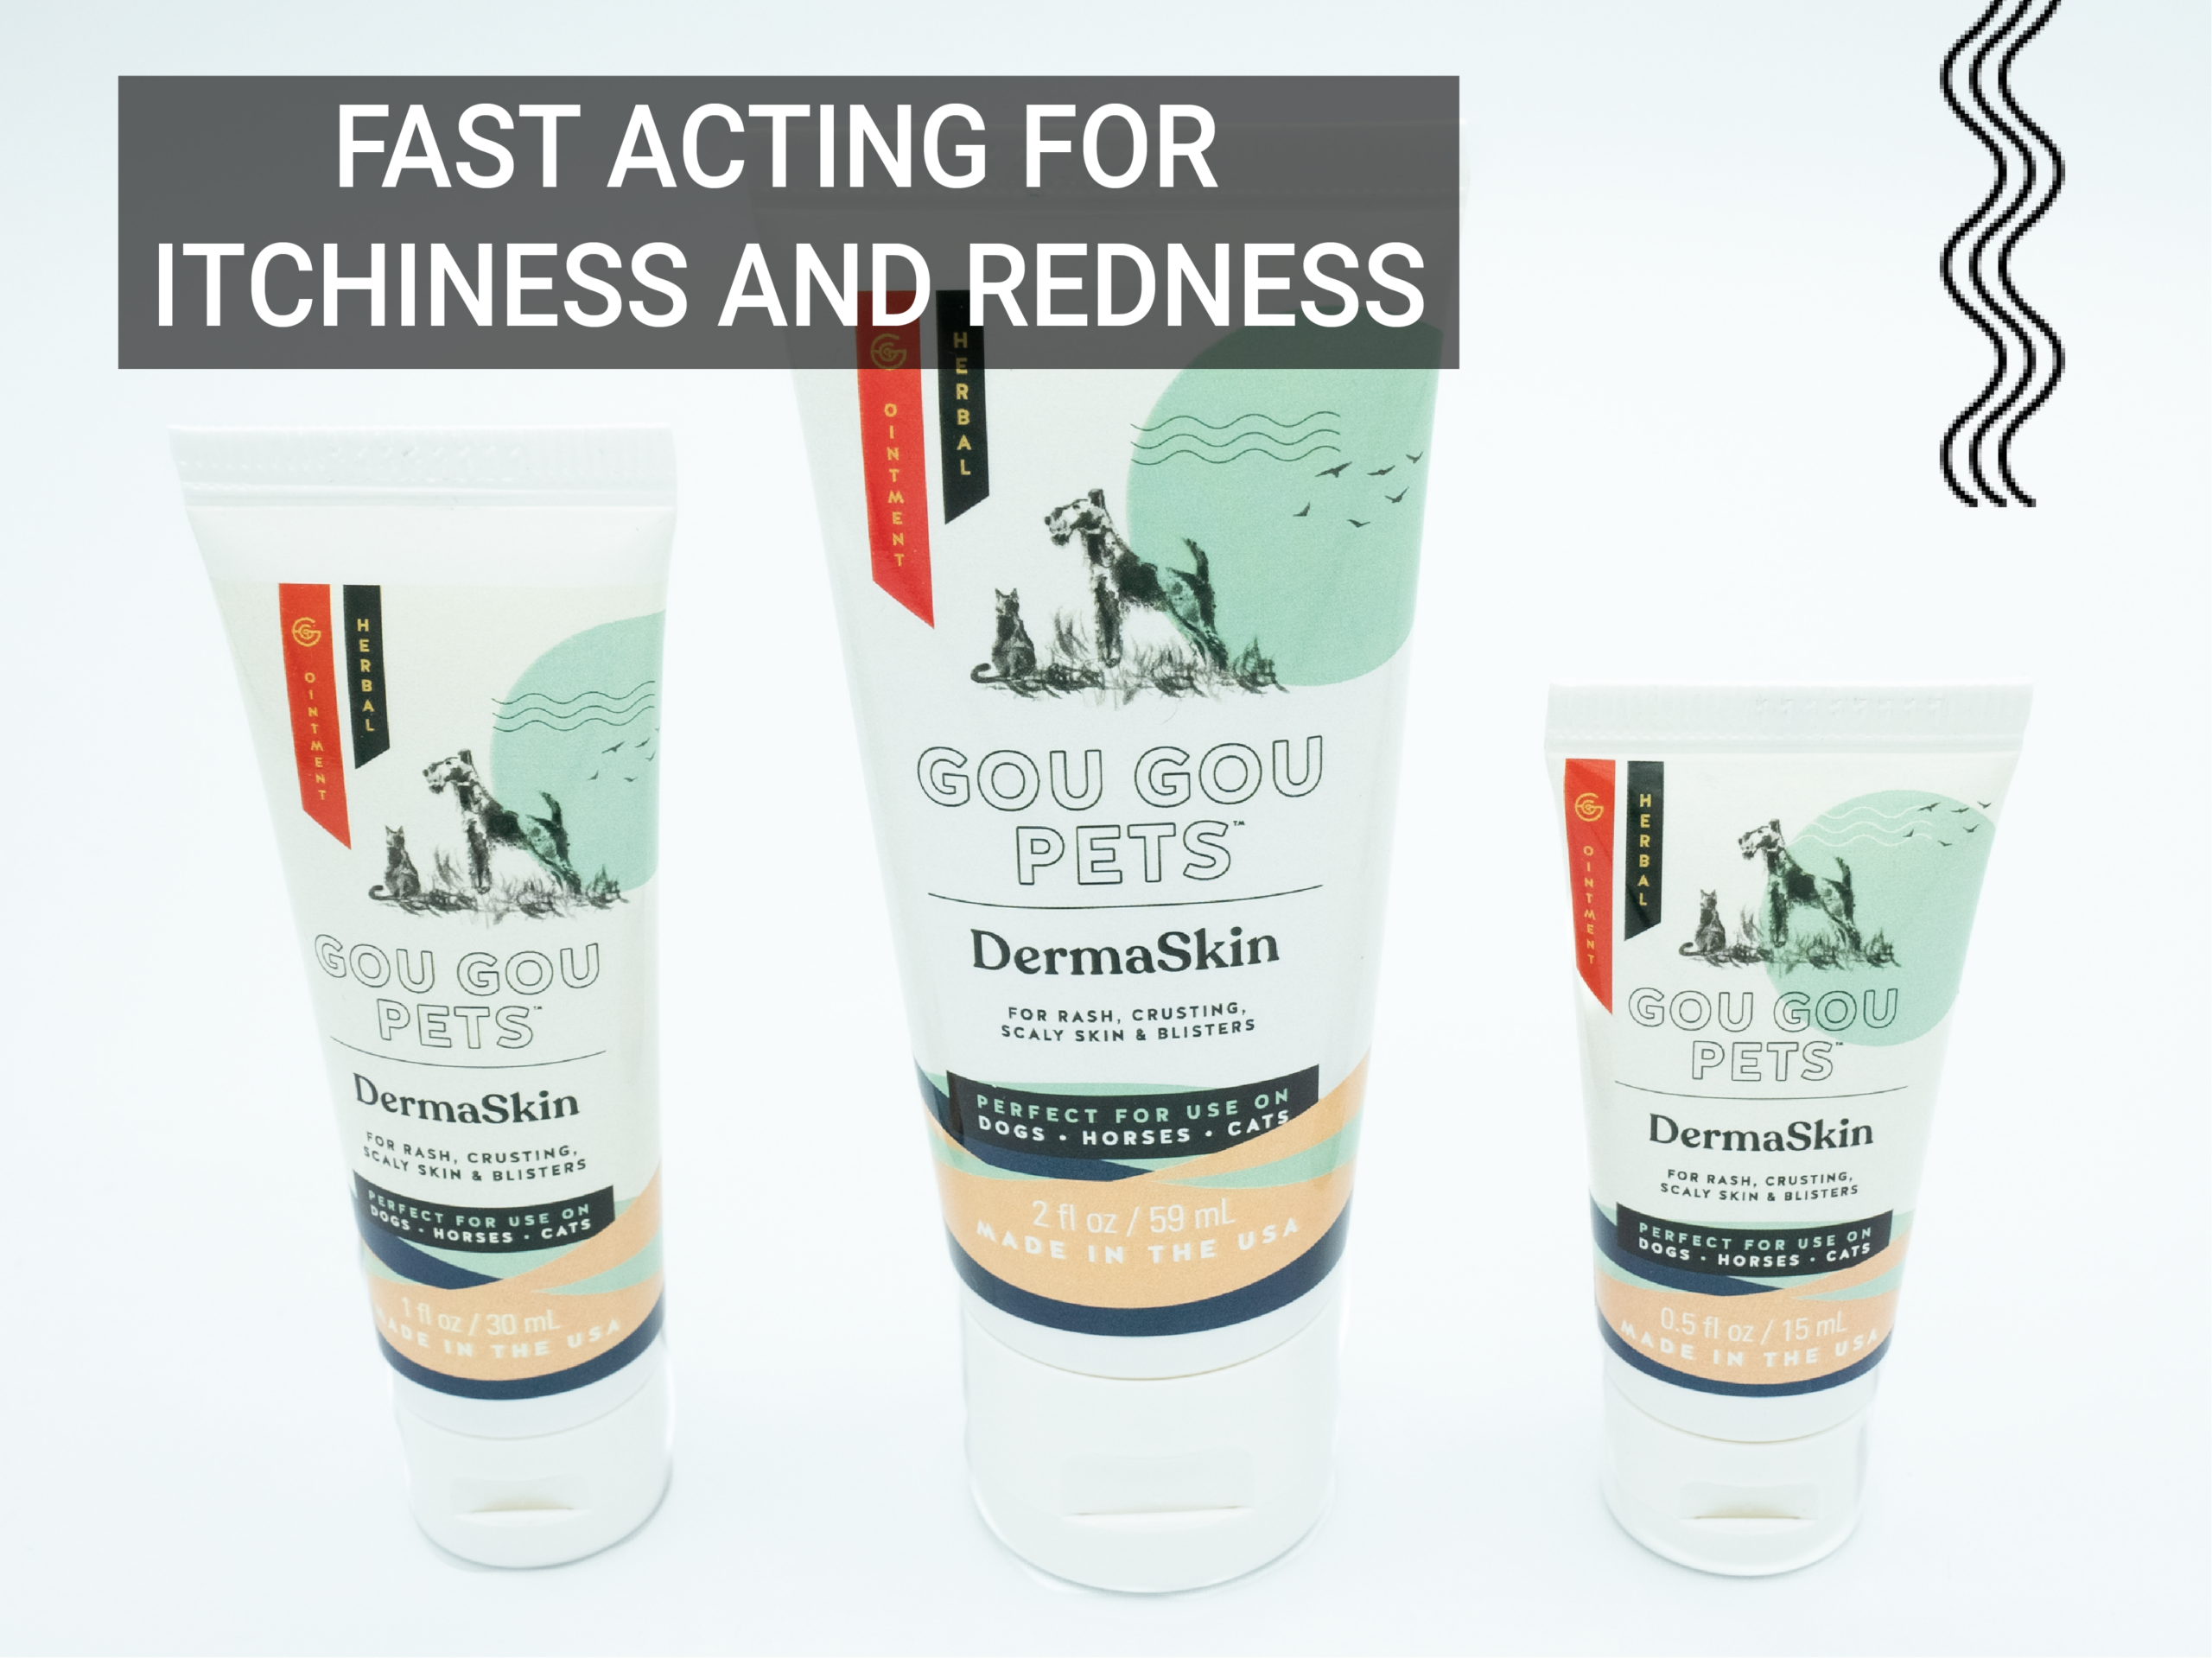 Gou Gou Pets Dermaskin Ointment for Dogs, Cats and Horses